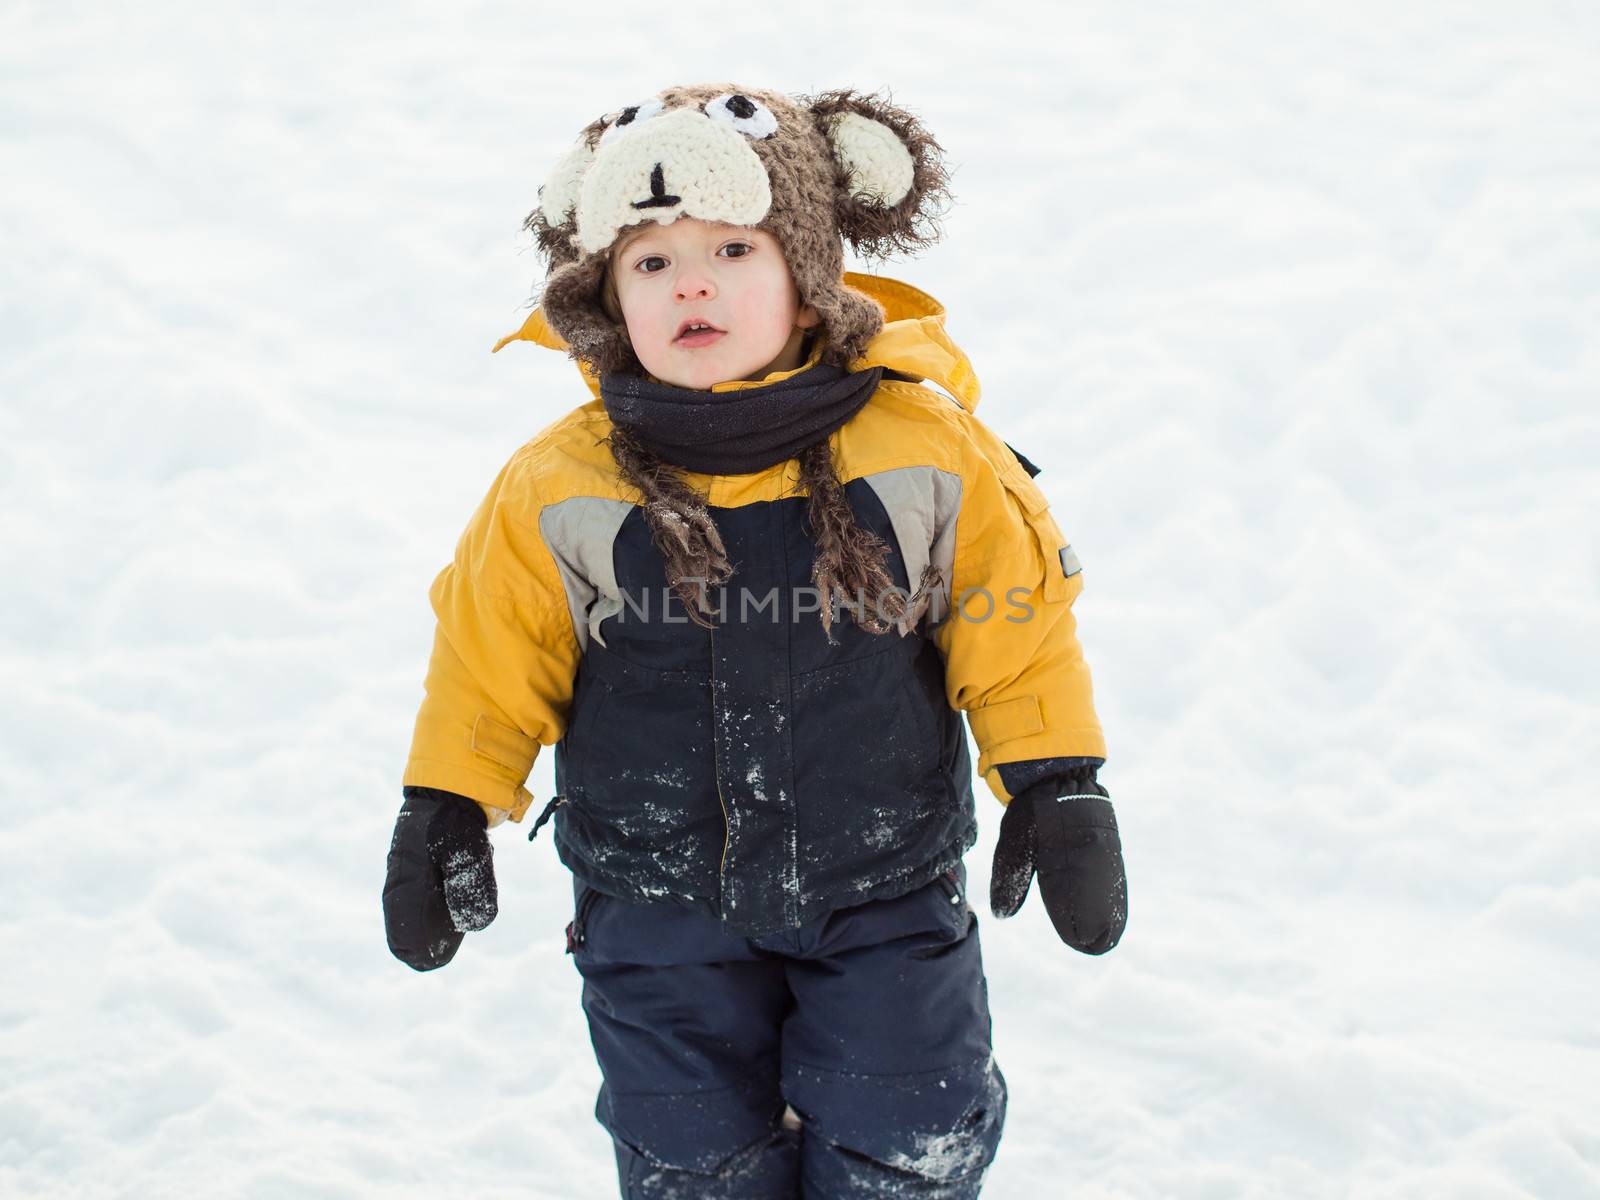 Infant in the snow by Talanis